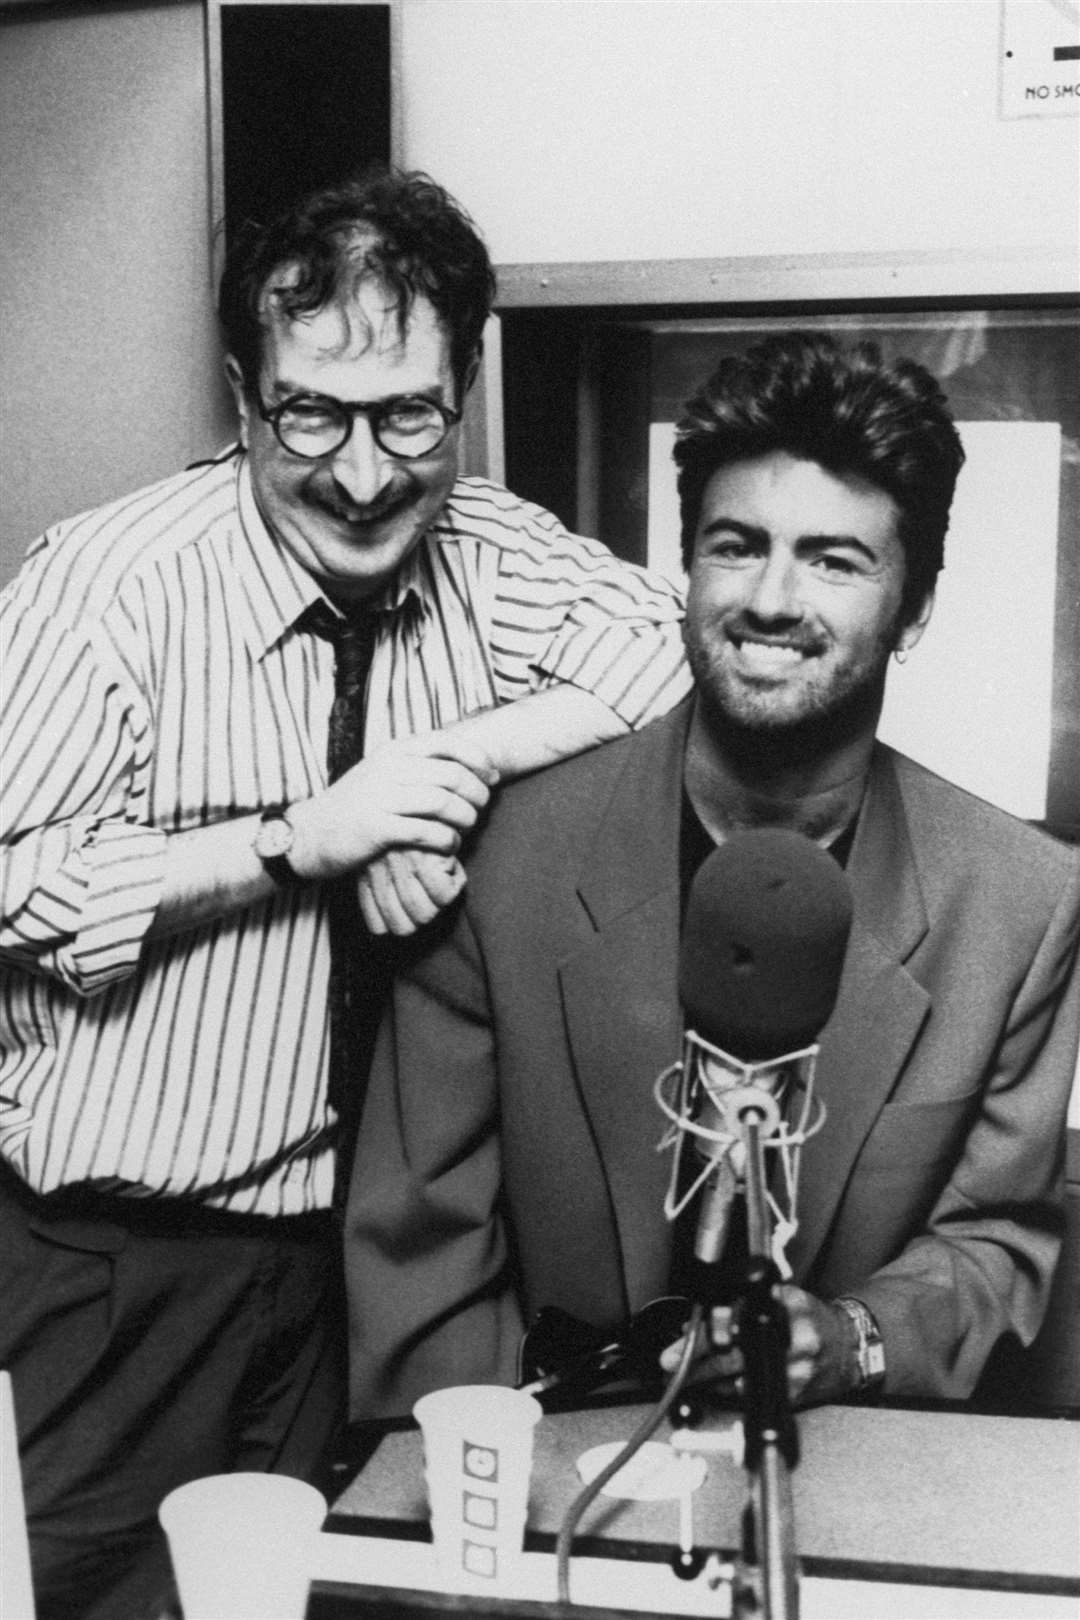 Singer George Michael, right, with Steve Wright (PA)